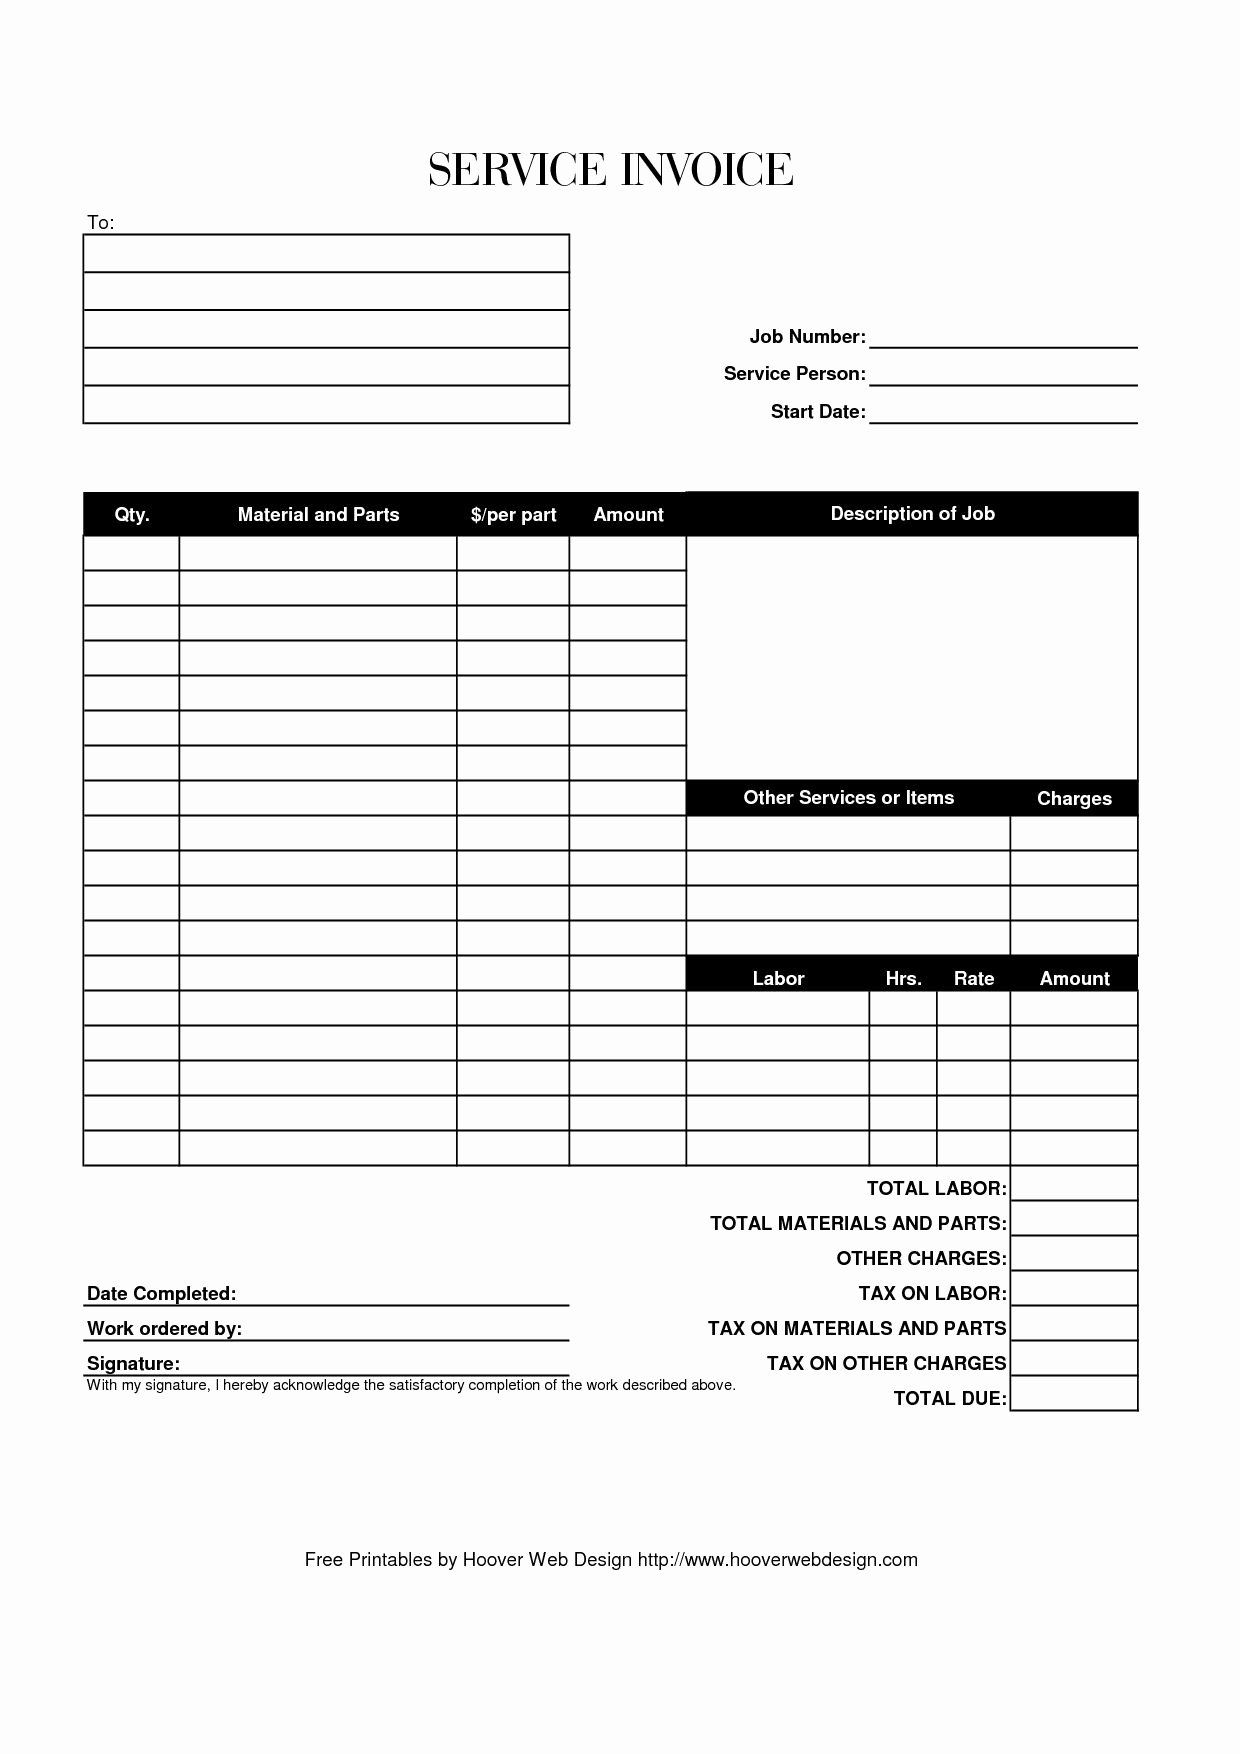 Service Invoice Template Free Lovely Blank Service Invoice Blank Invoice Blank Service Invoice